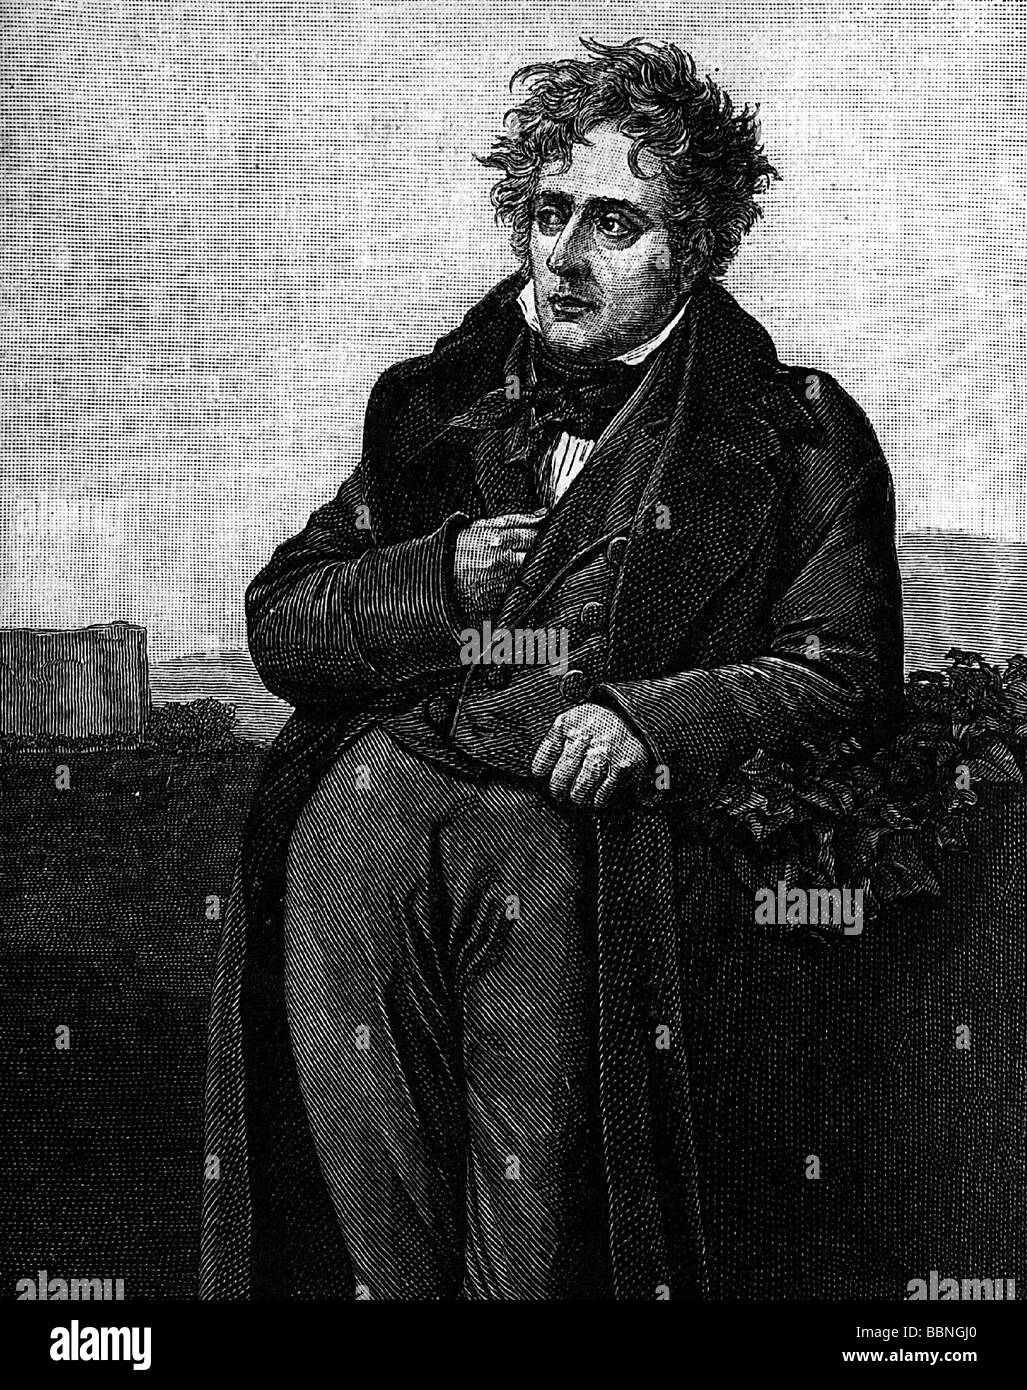 Chateaubriand, Francois Rene de, 4.9.1768 - 4.7.1848, French author / writer and politician, half length, after painting by Girodet-Triosson, wood engraving, 19th century, Stock Photo